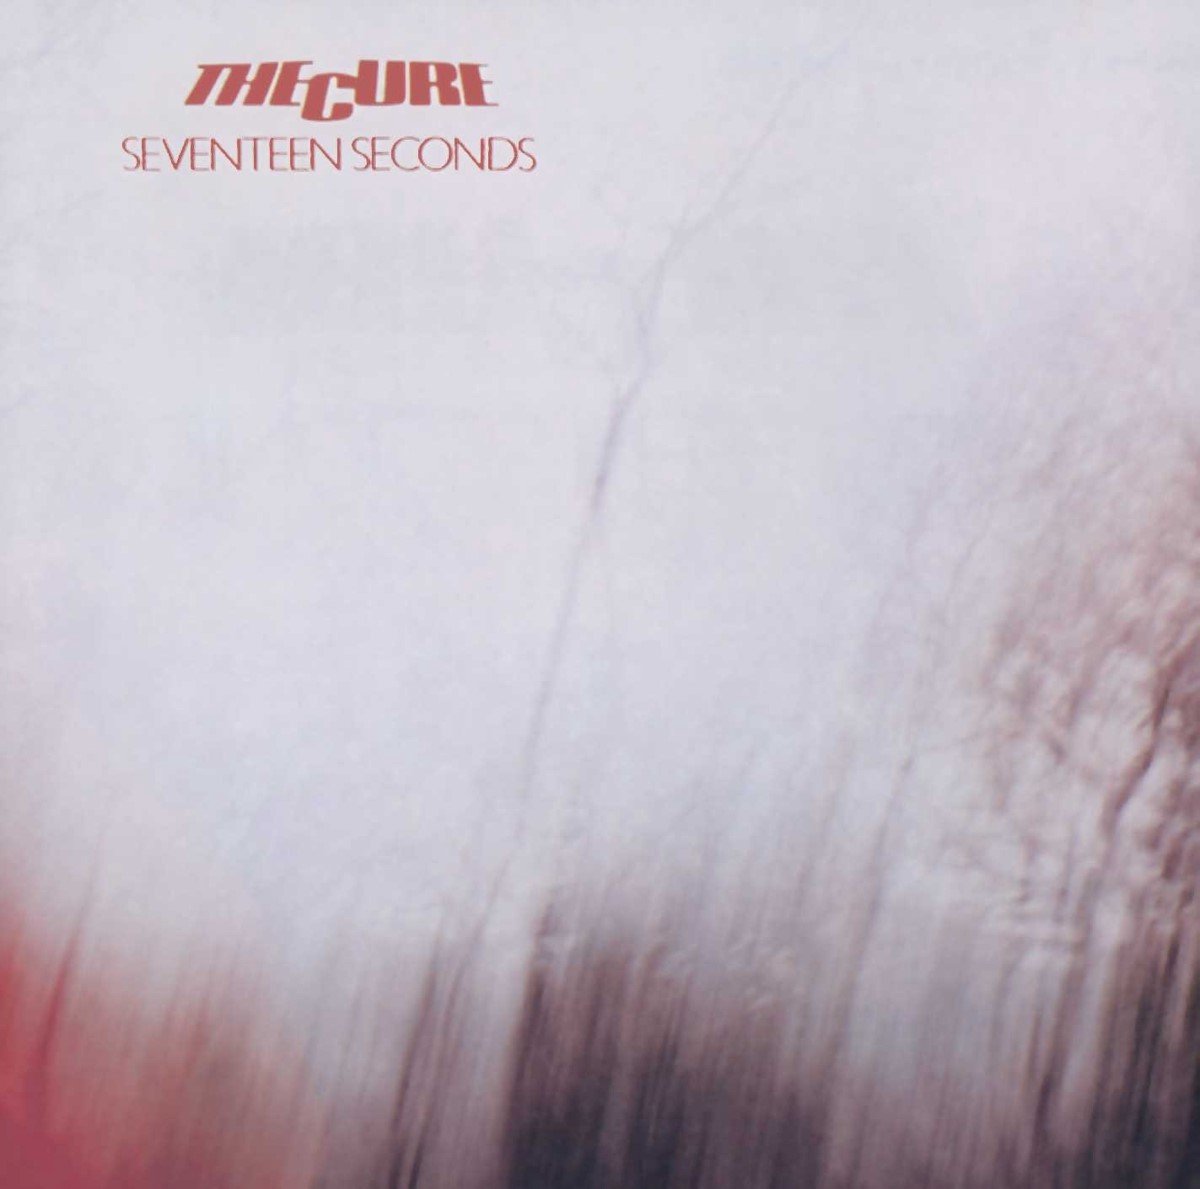 The Cure - Seventeen Seconds (CD) (Remastered) - The Cure